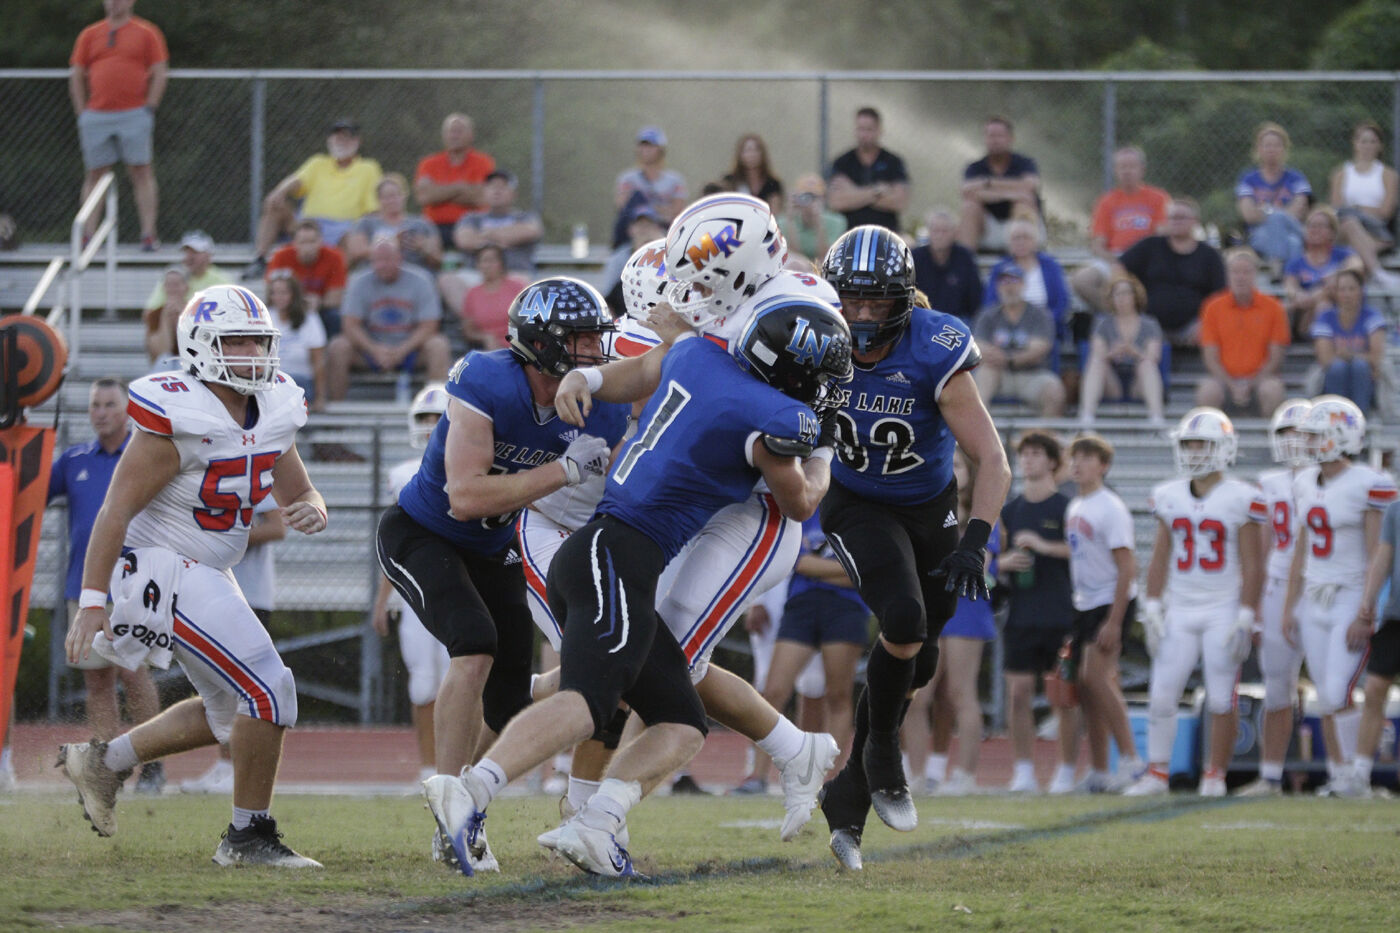 Unbeaten Lake Norman resumes conference play; perfect Mooresville steps out of league